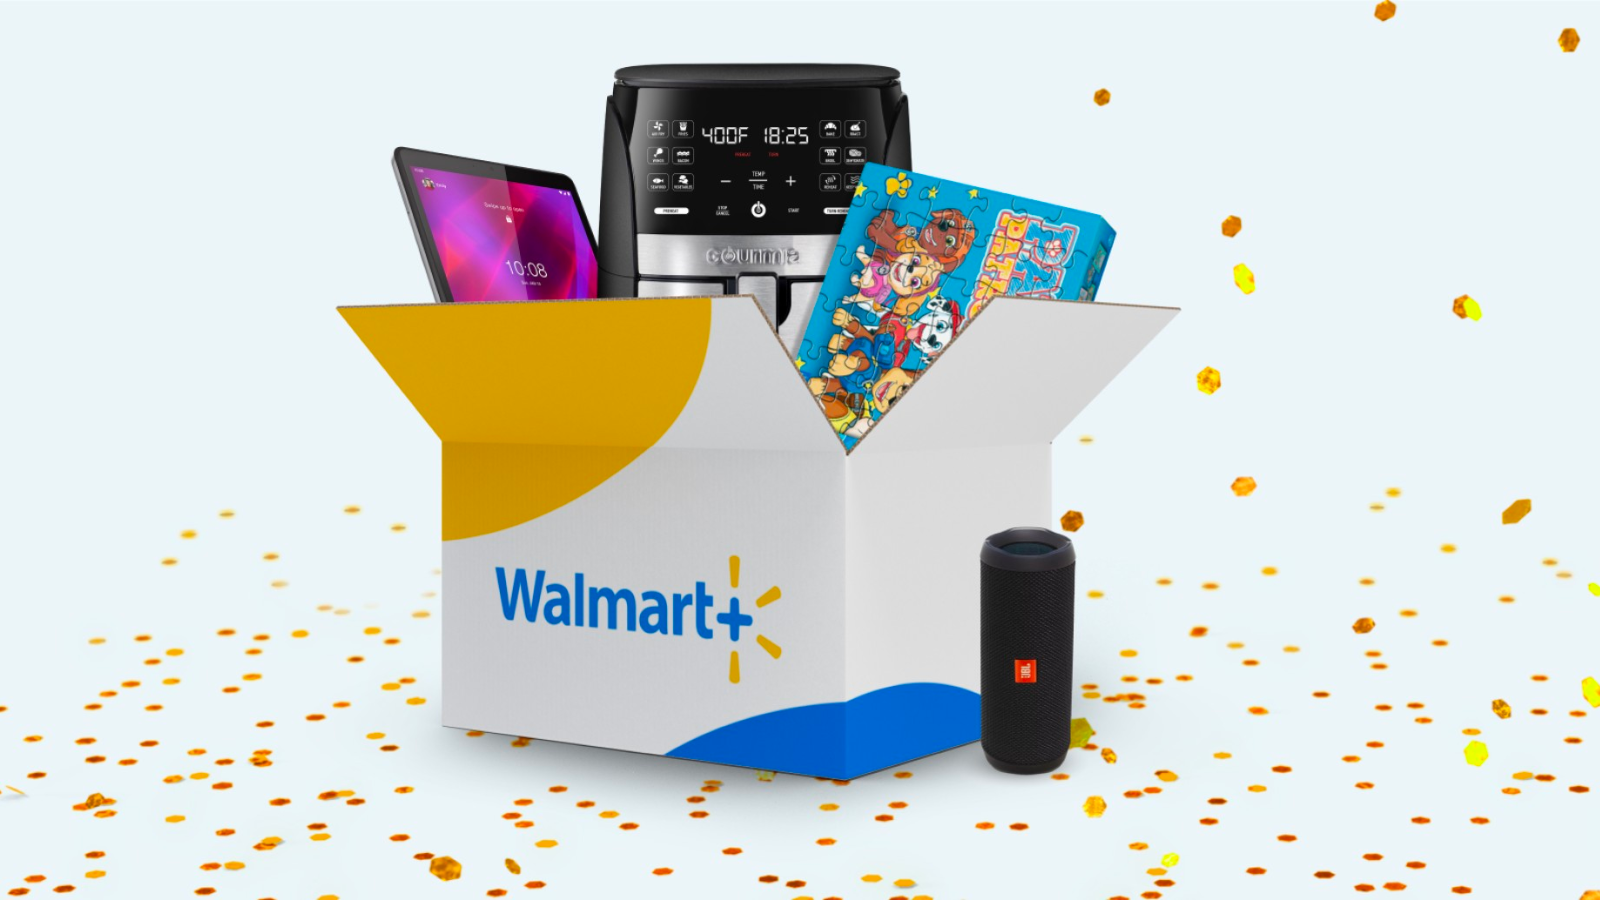 a box with walmart+ branding that contains an air fryer, a tablet, and a puzzle. it sits next to a jbl speaker and is surrounded by confetti